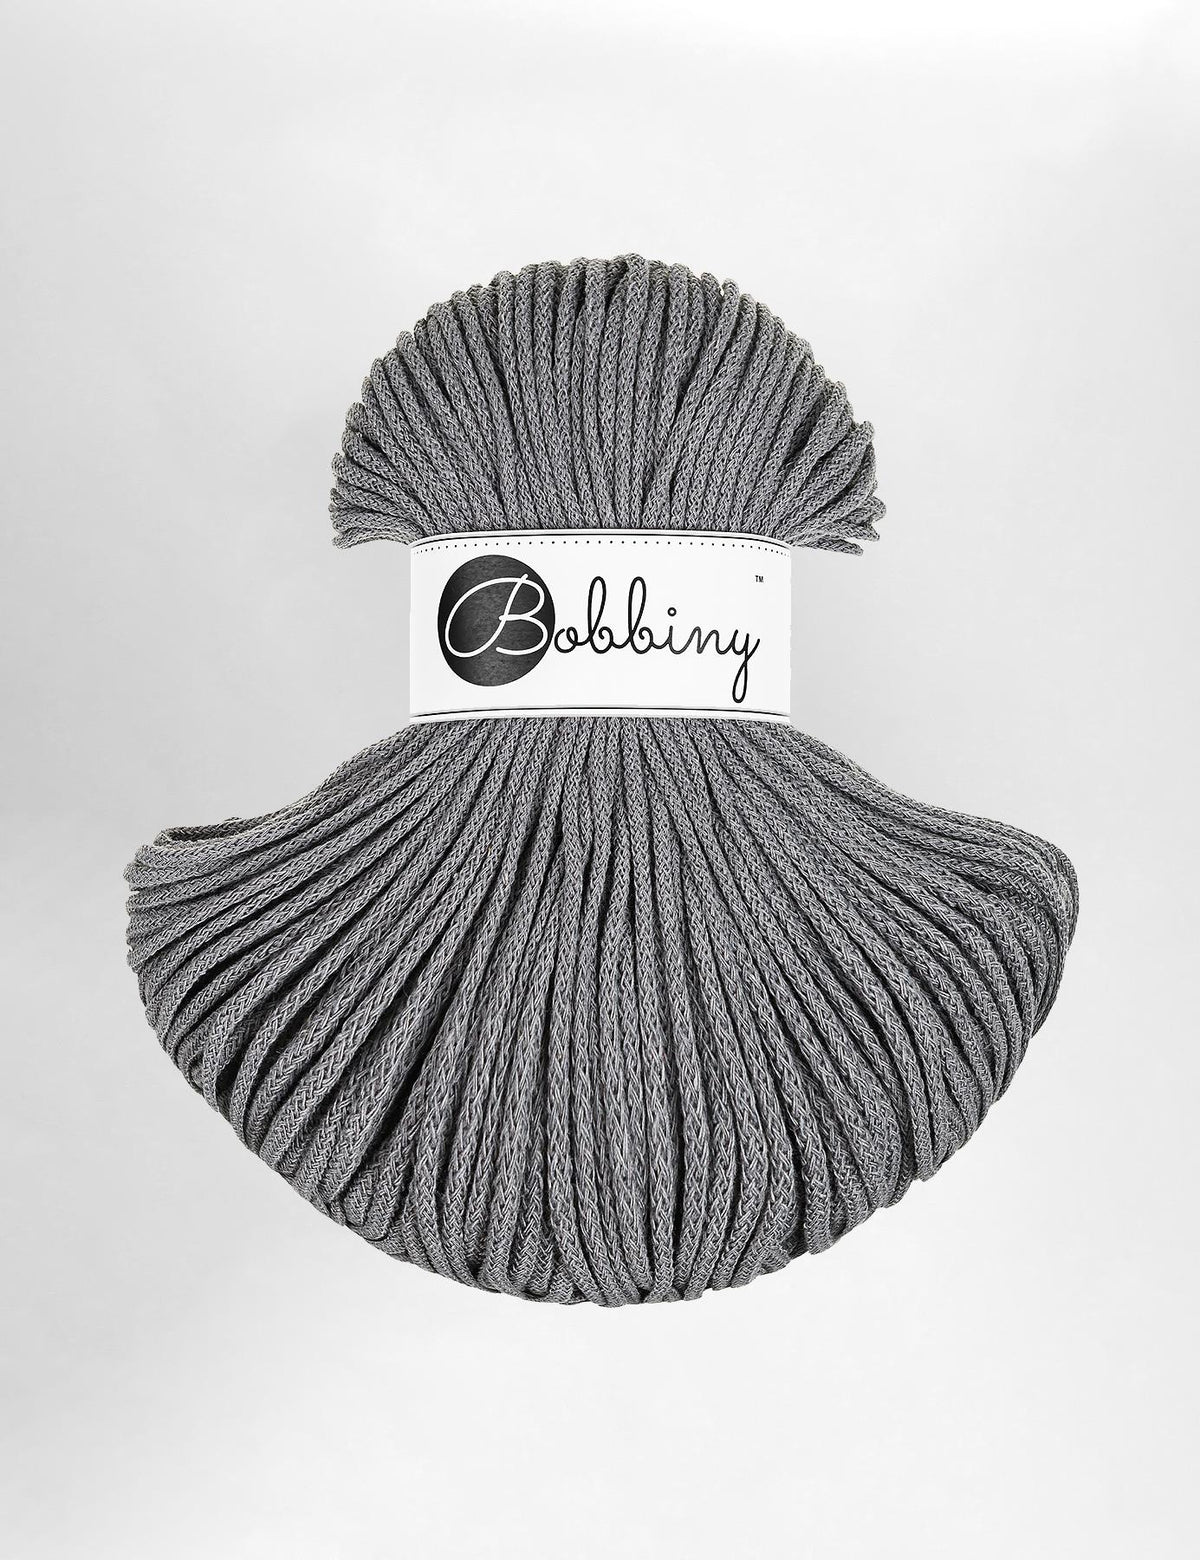 3mm Stone Grey recycled cotton macrame cord by Bobbiny (100m)